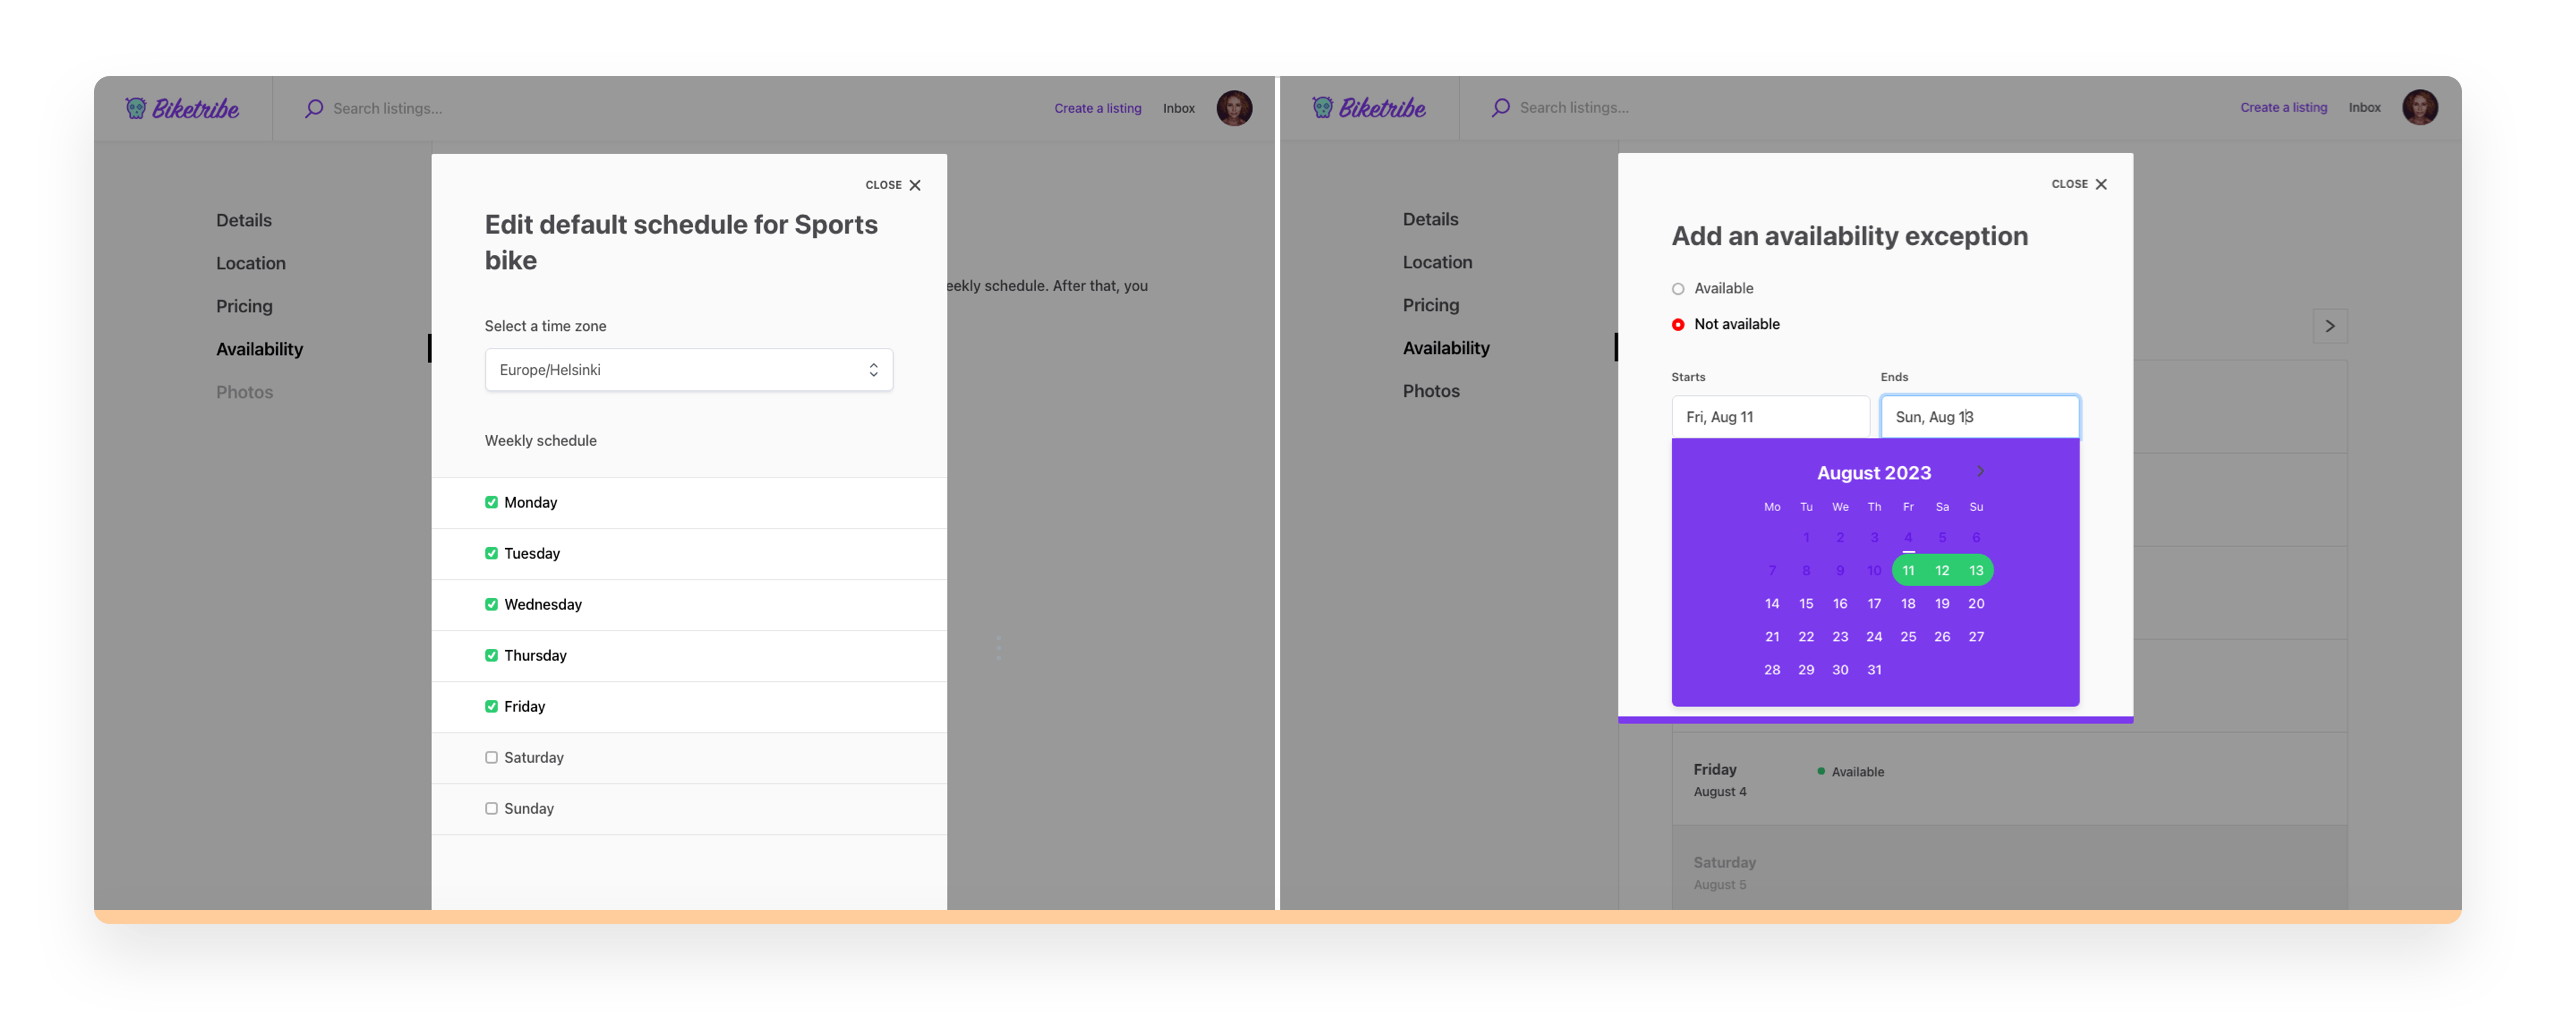 Screenshots of availability management on a sample Sharetribe marketplace. First, setting a weekly schedule. Then, adding an availability exception in a calendar view.